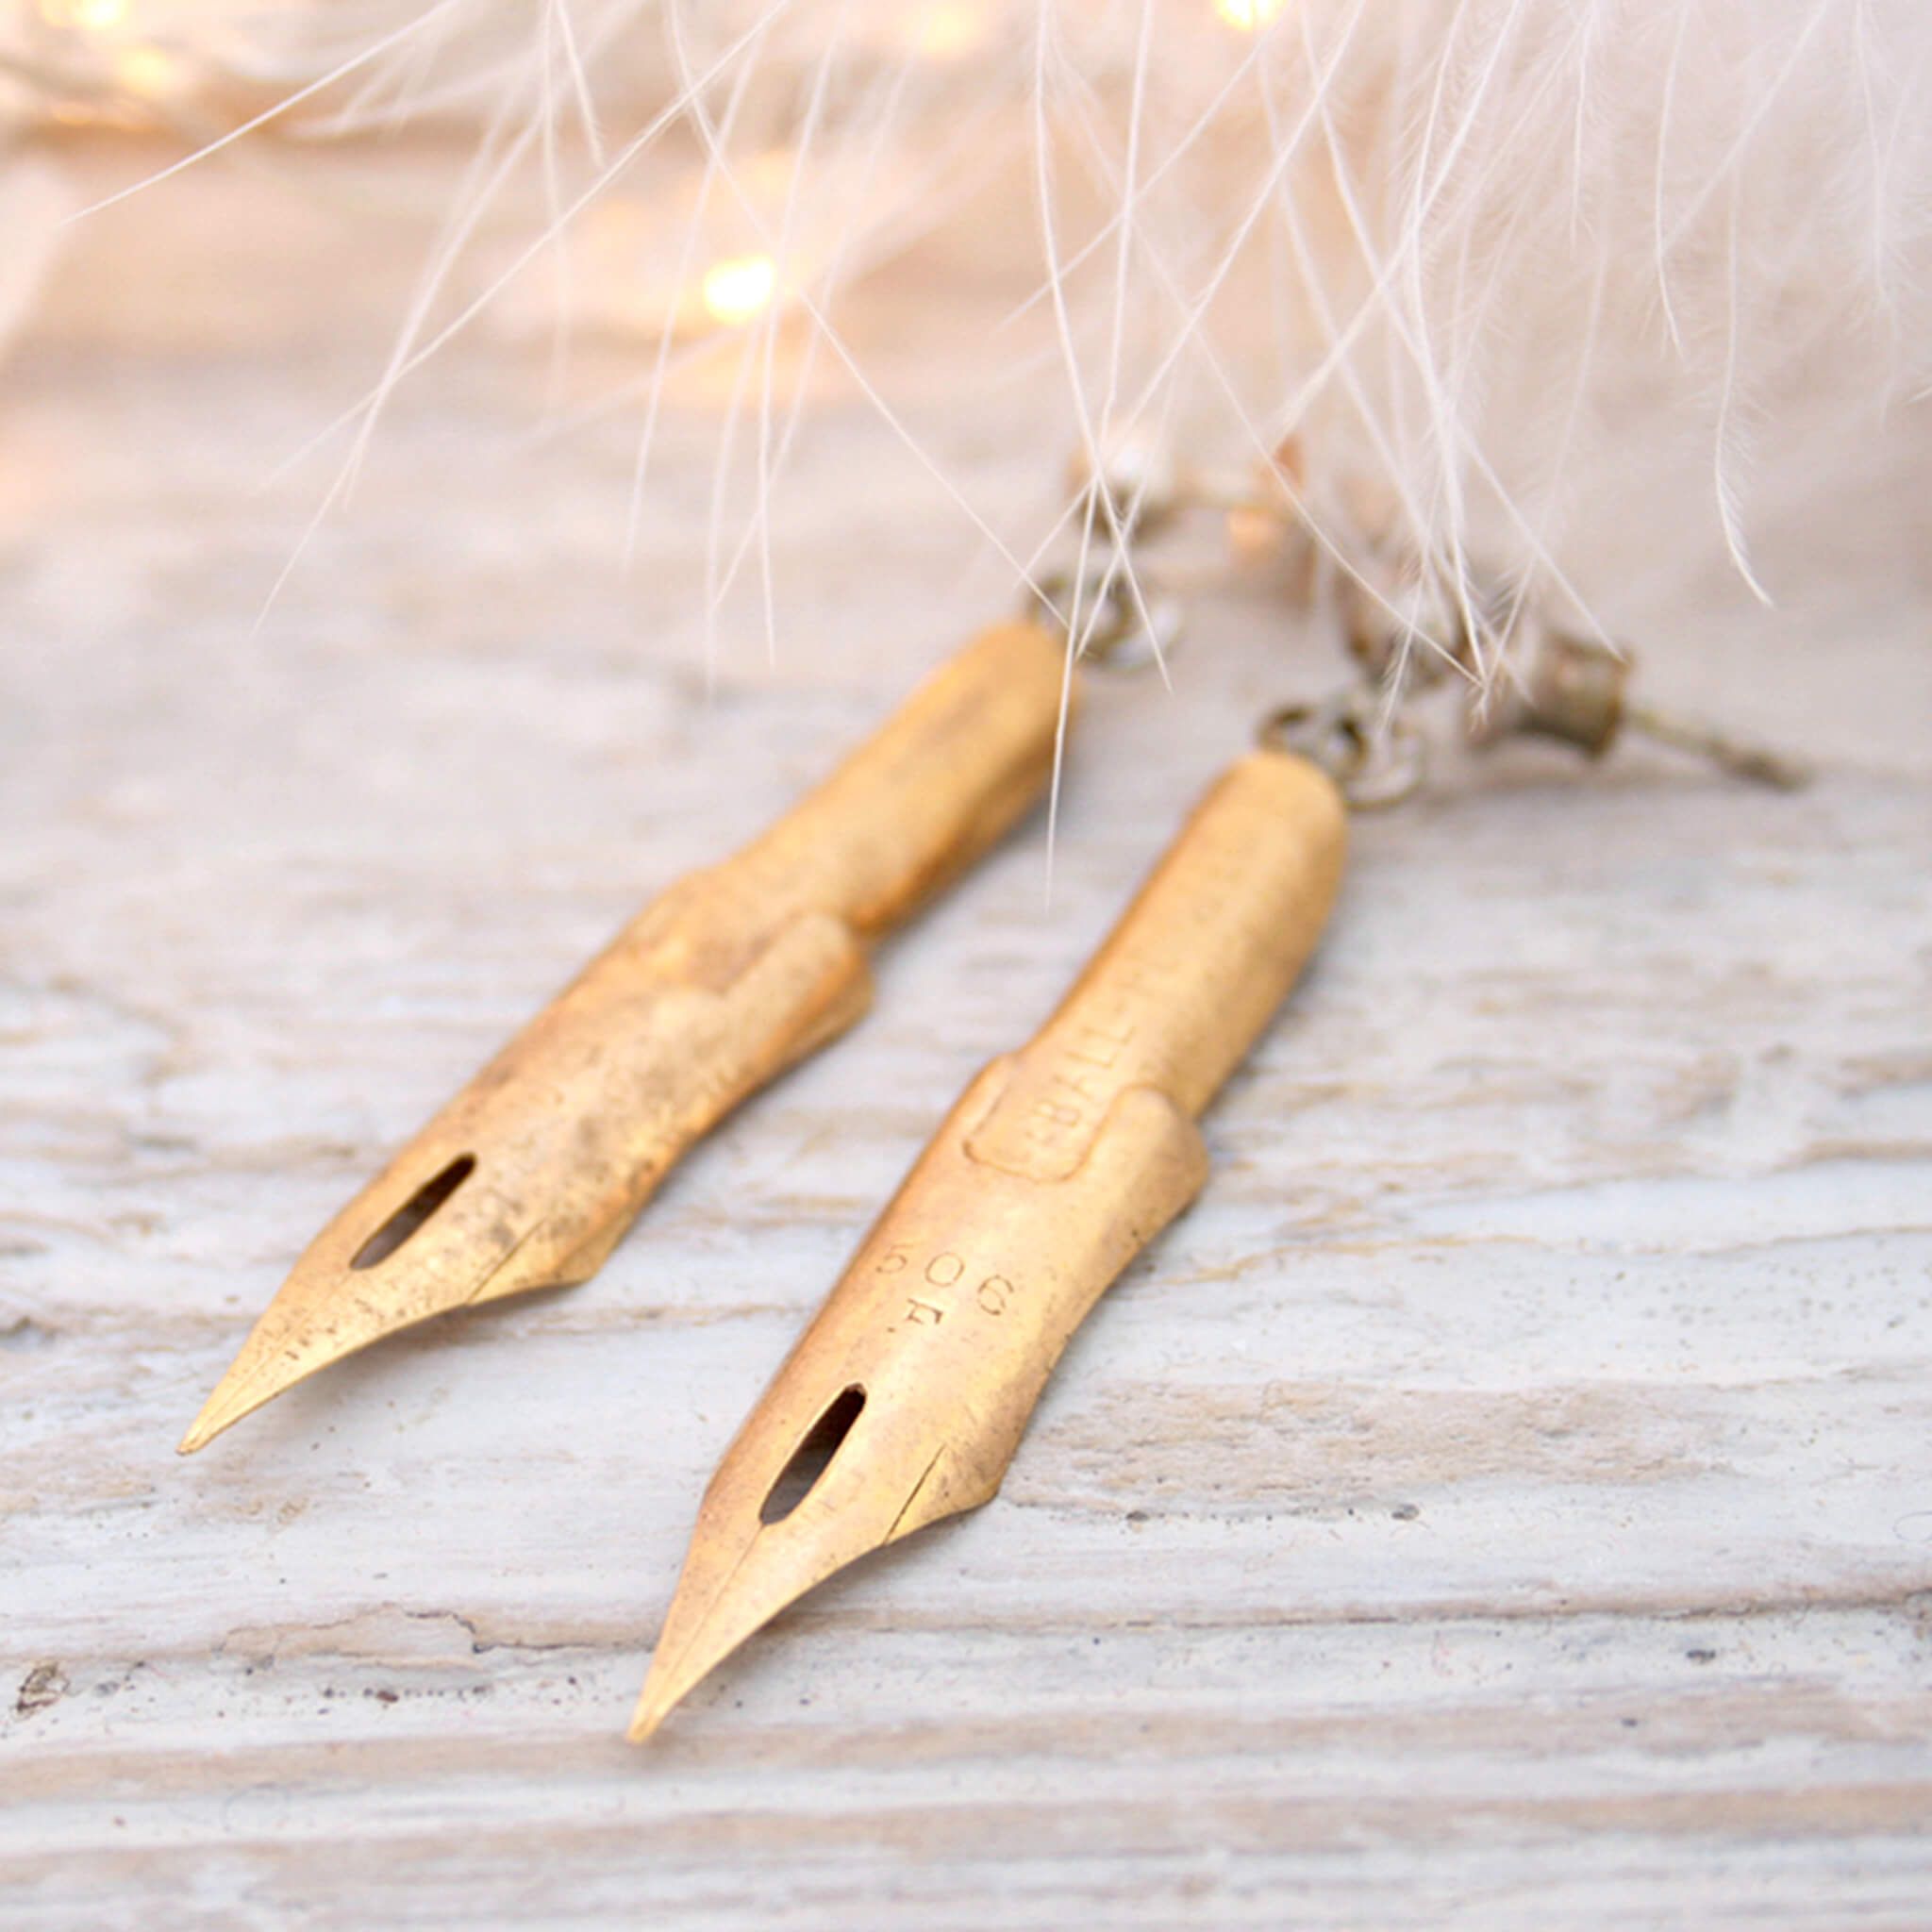 dark academia earrings made of gold coated pen nibs lying on a white piece of wood